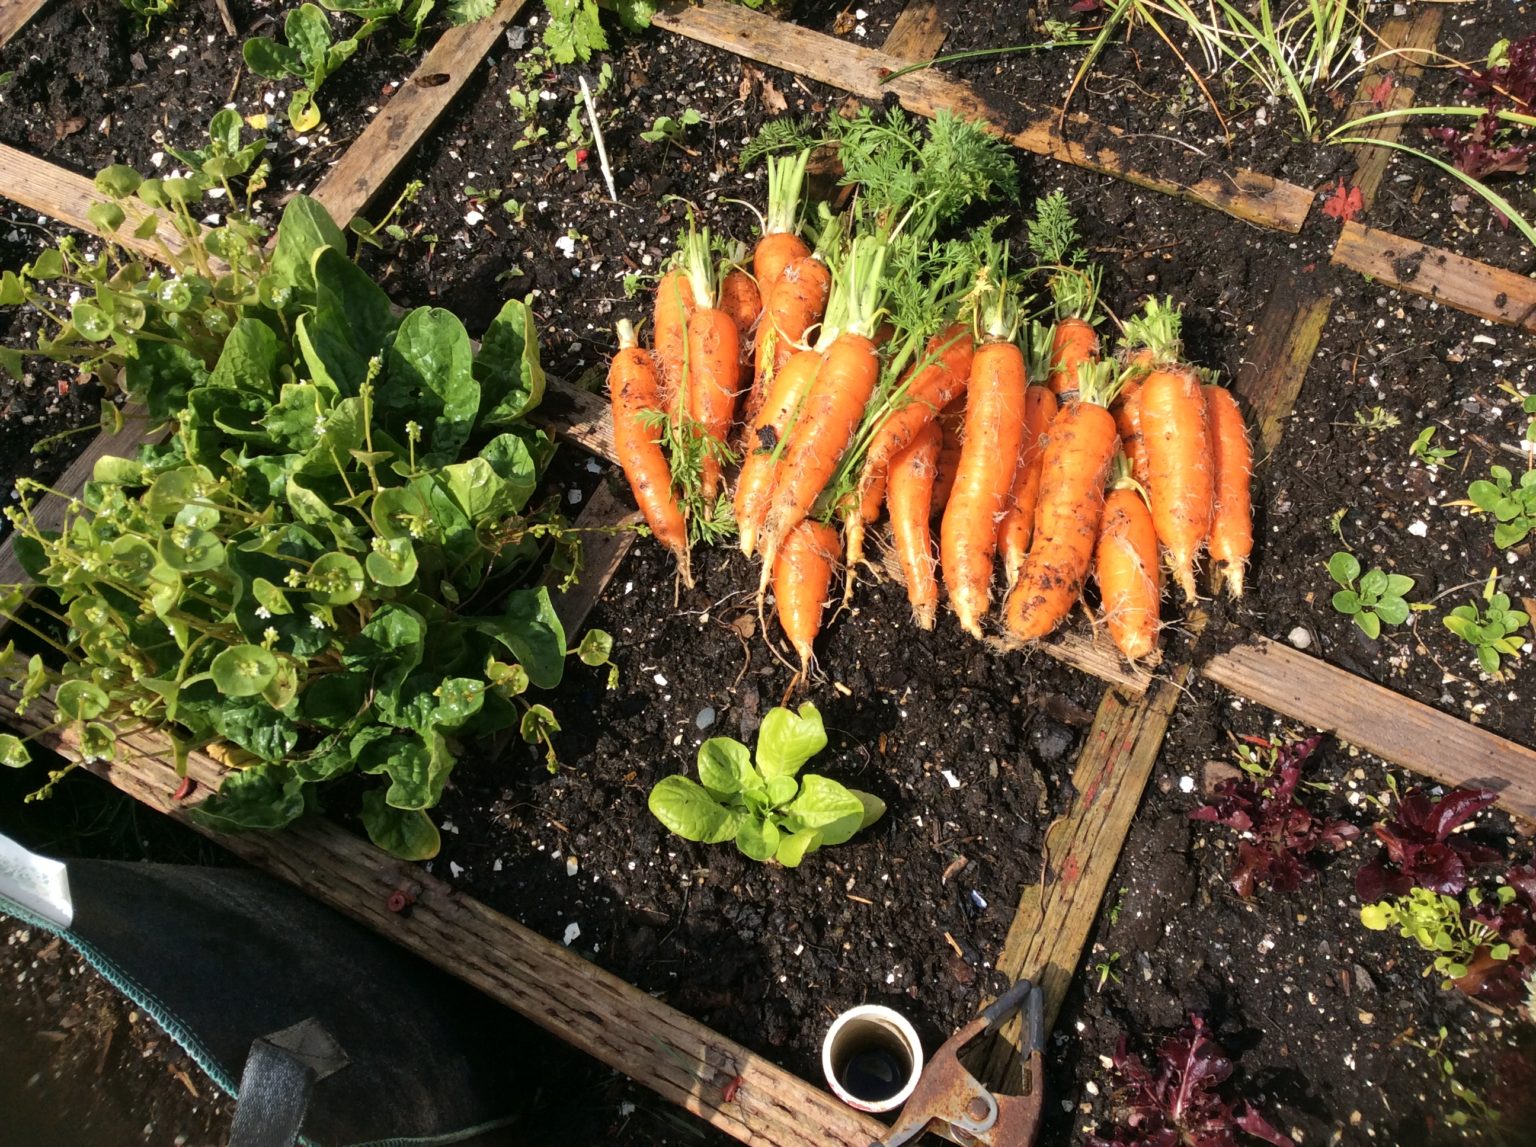 How many carrots can you grow in 1 square foot? – The Wealthy Earth